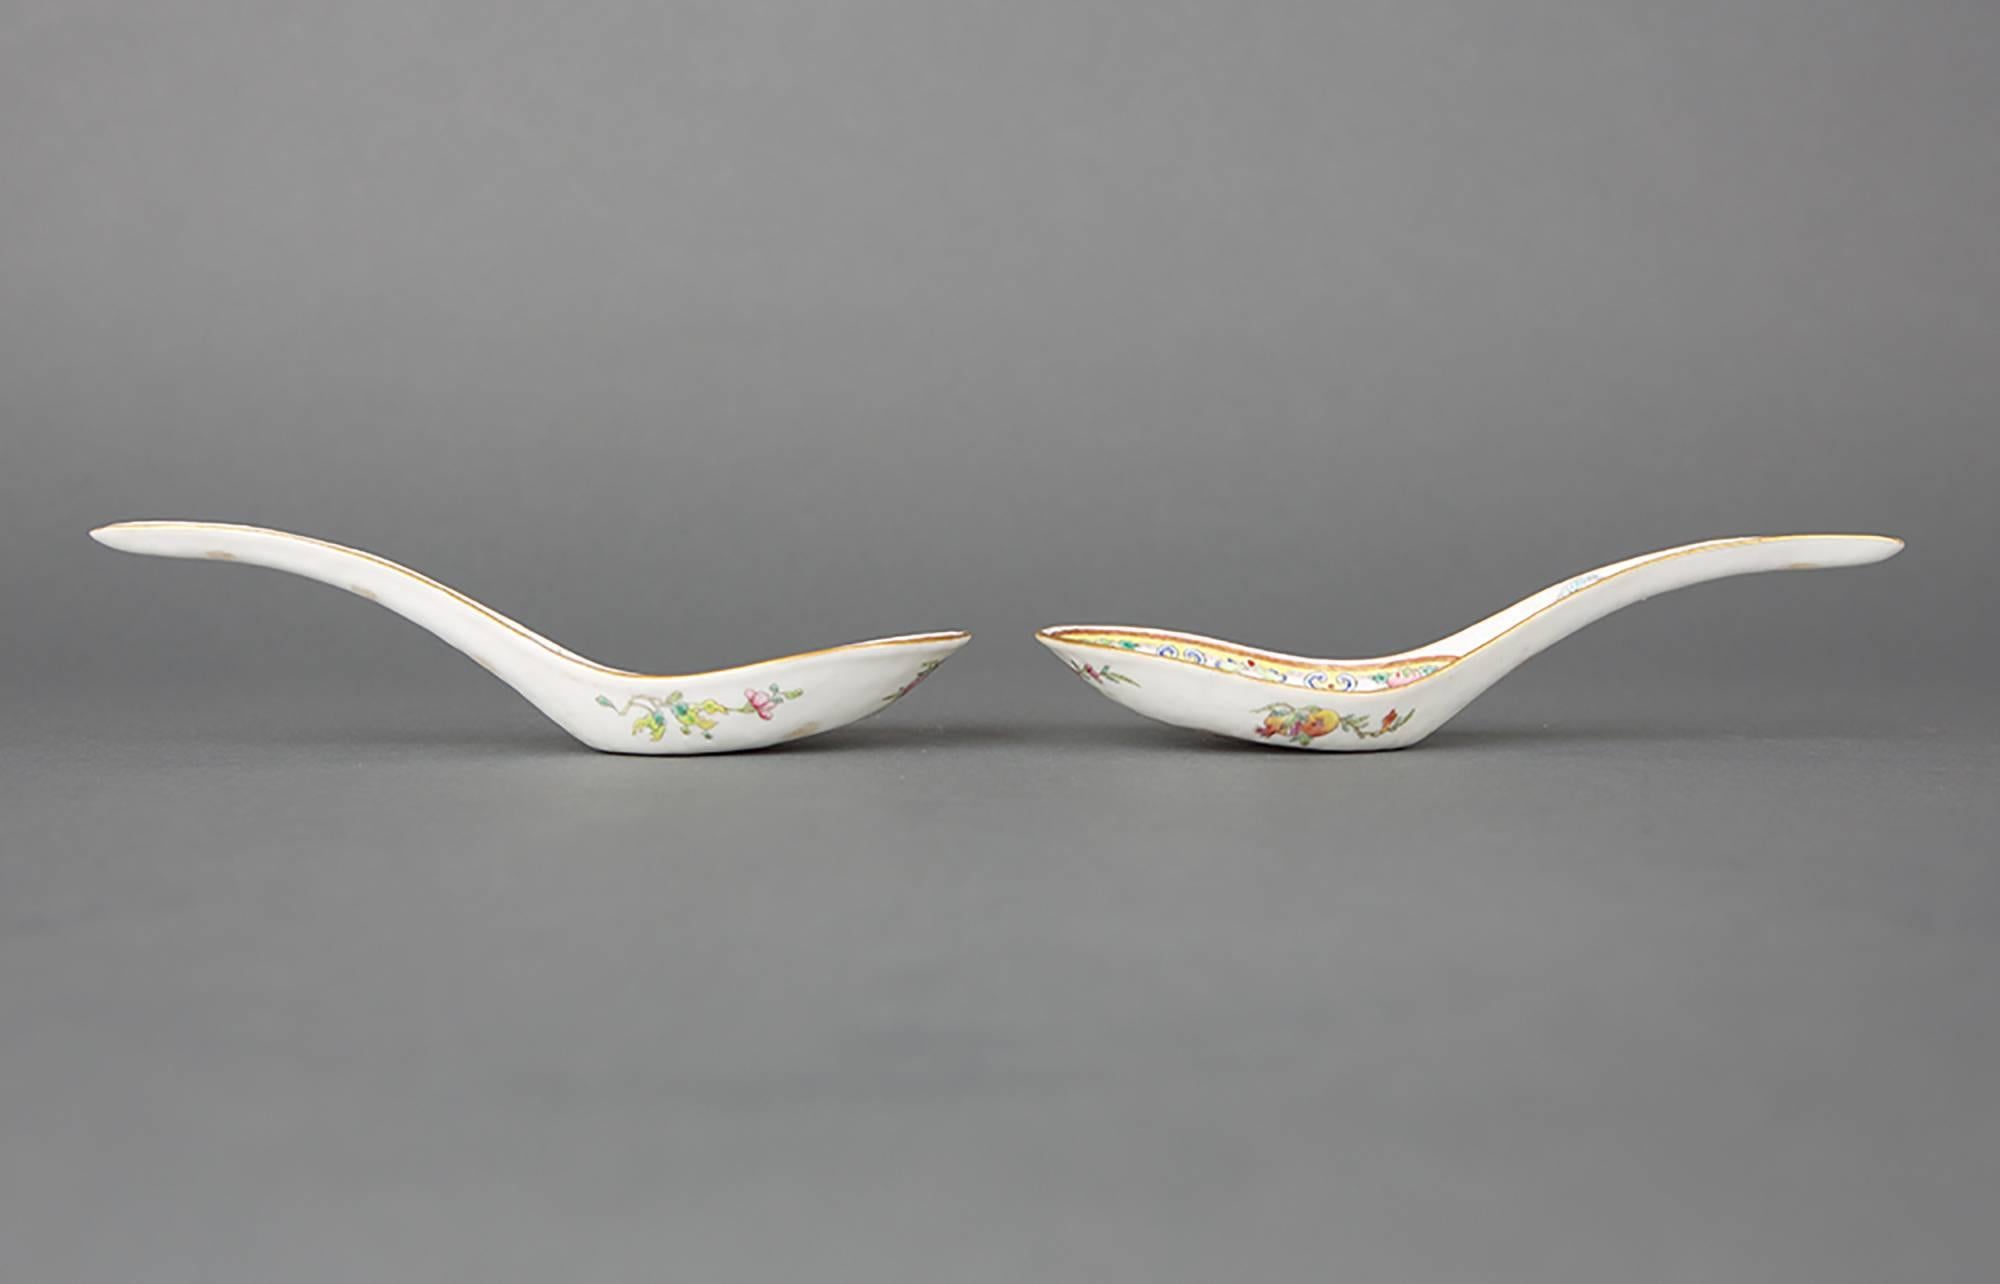 A pair of Chinese porcelain famille rose spoons painted with five bats, wu fu, three bats on the interior bowl of the spoon encircled by a decorative border with ruyi-heads and peach, the remaining two bats in the curved handle, the edges heightened